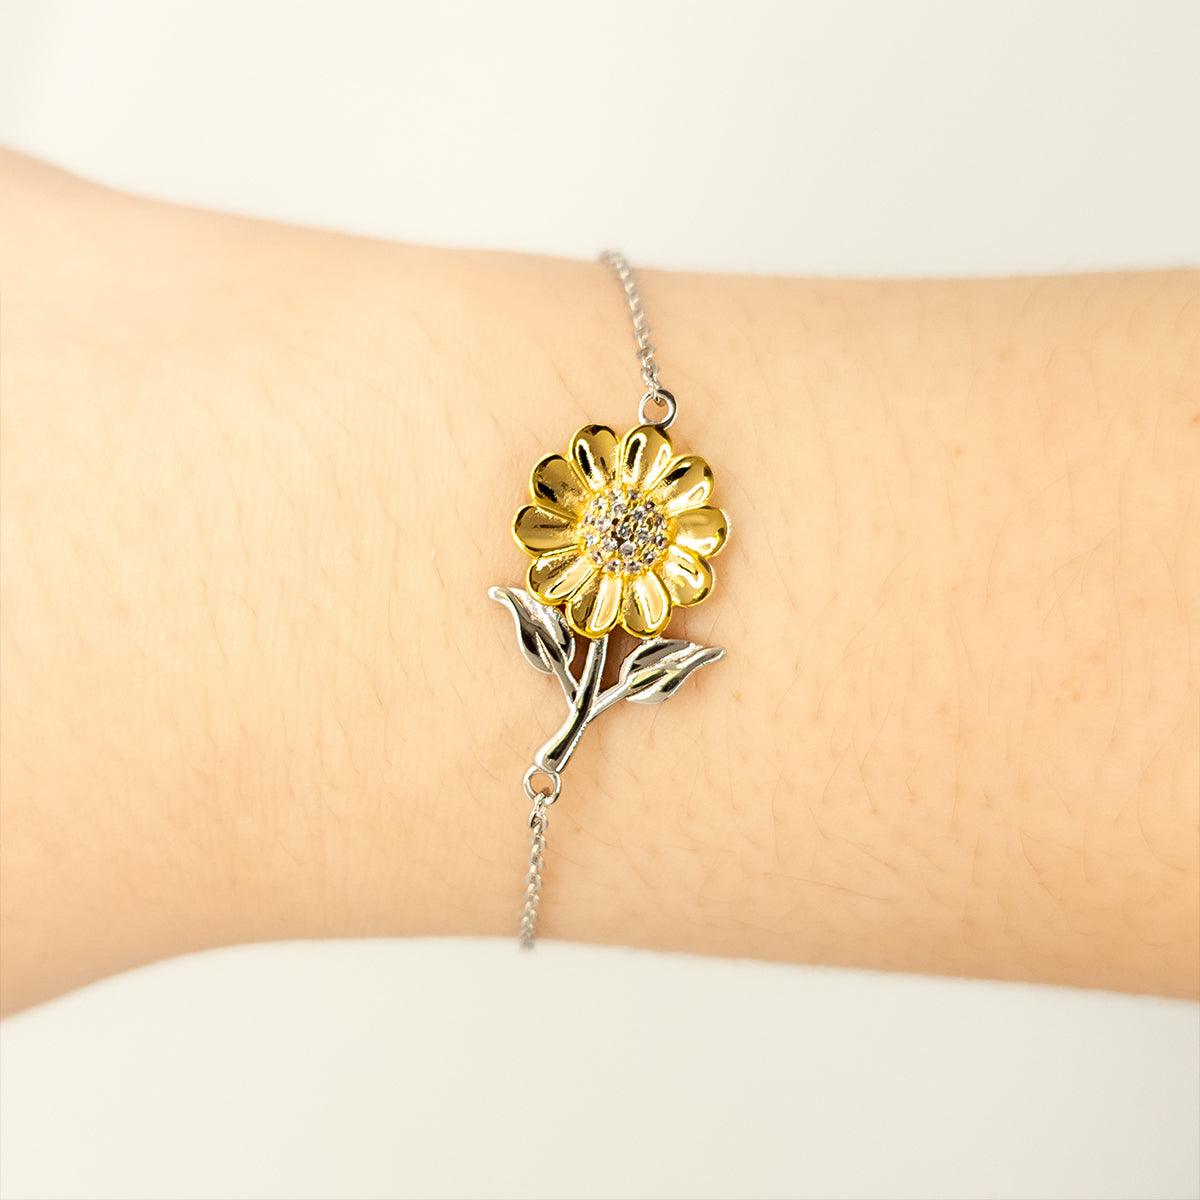 Apartment Manager Sunflower Bracelet - Thanks for being who you are - Birthday Christmas Jewelry Gifts Coworkers Colleague Boss - Mallard Moon Gift Shop